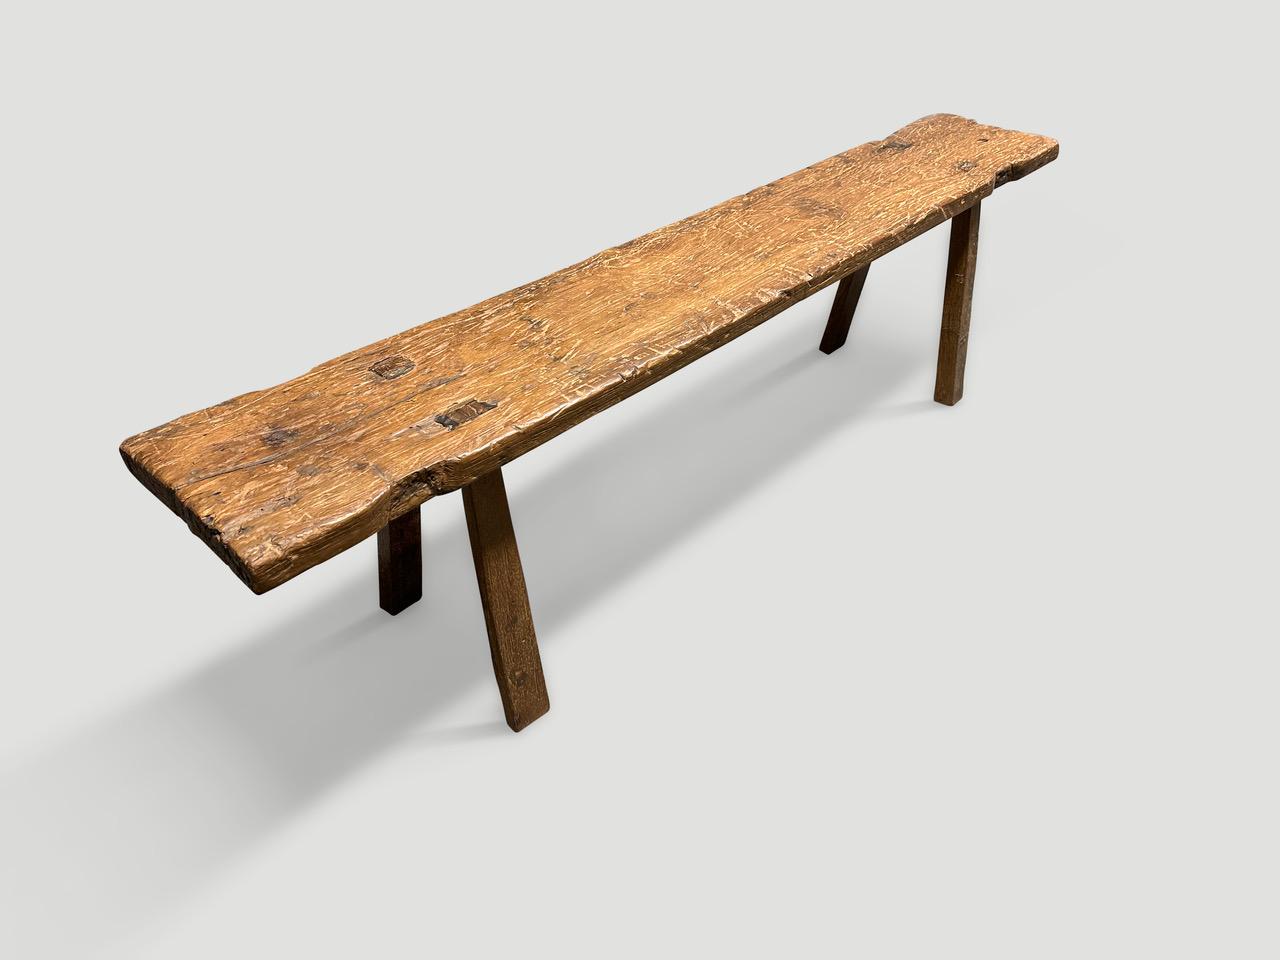 Antique bench hand made from a single panel of teak wood with lovely patina. Circa 1950.

This bench was hand made in the spirit of Wabi-Sabi, a Japanese philosophy that beauty can be found in imperfection and impermanence. It is a beauty of things